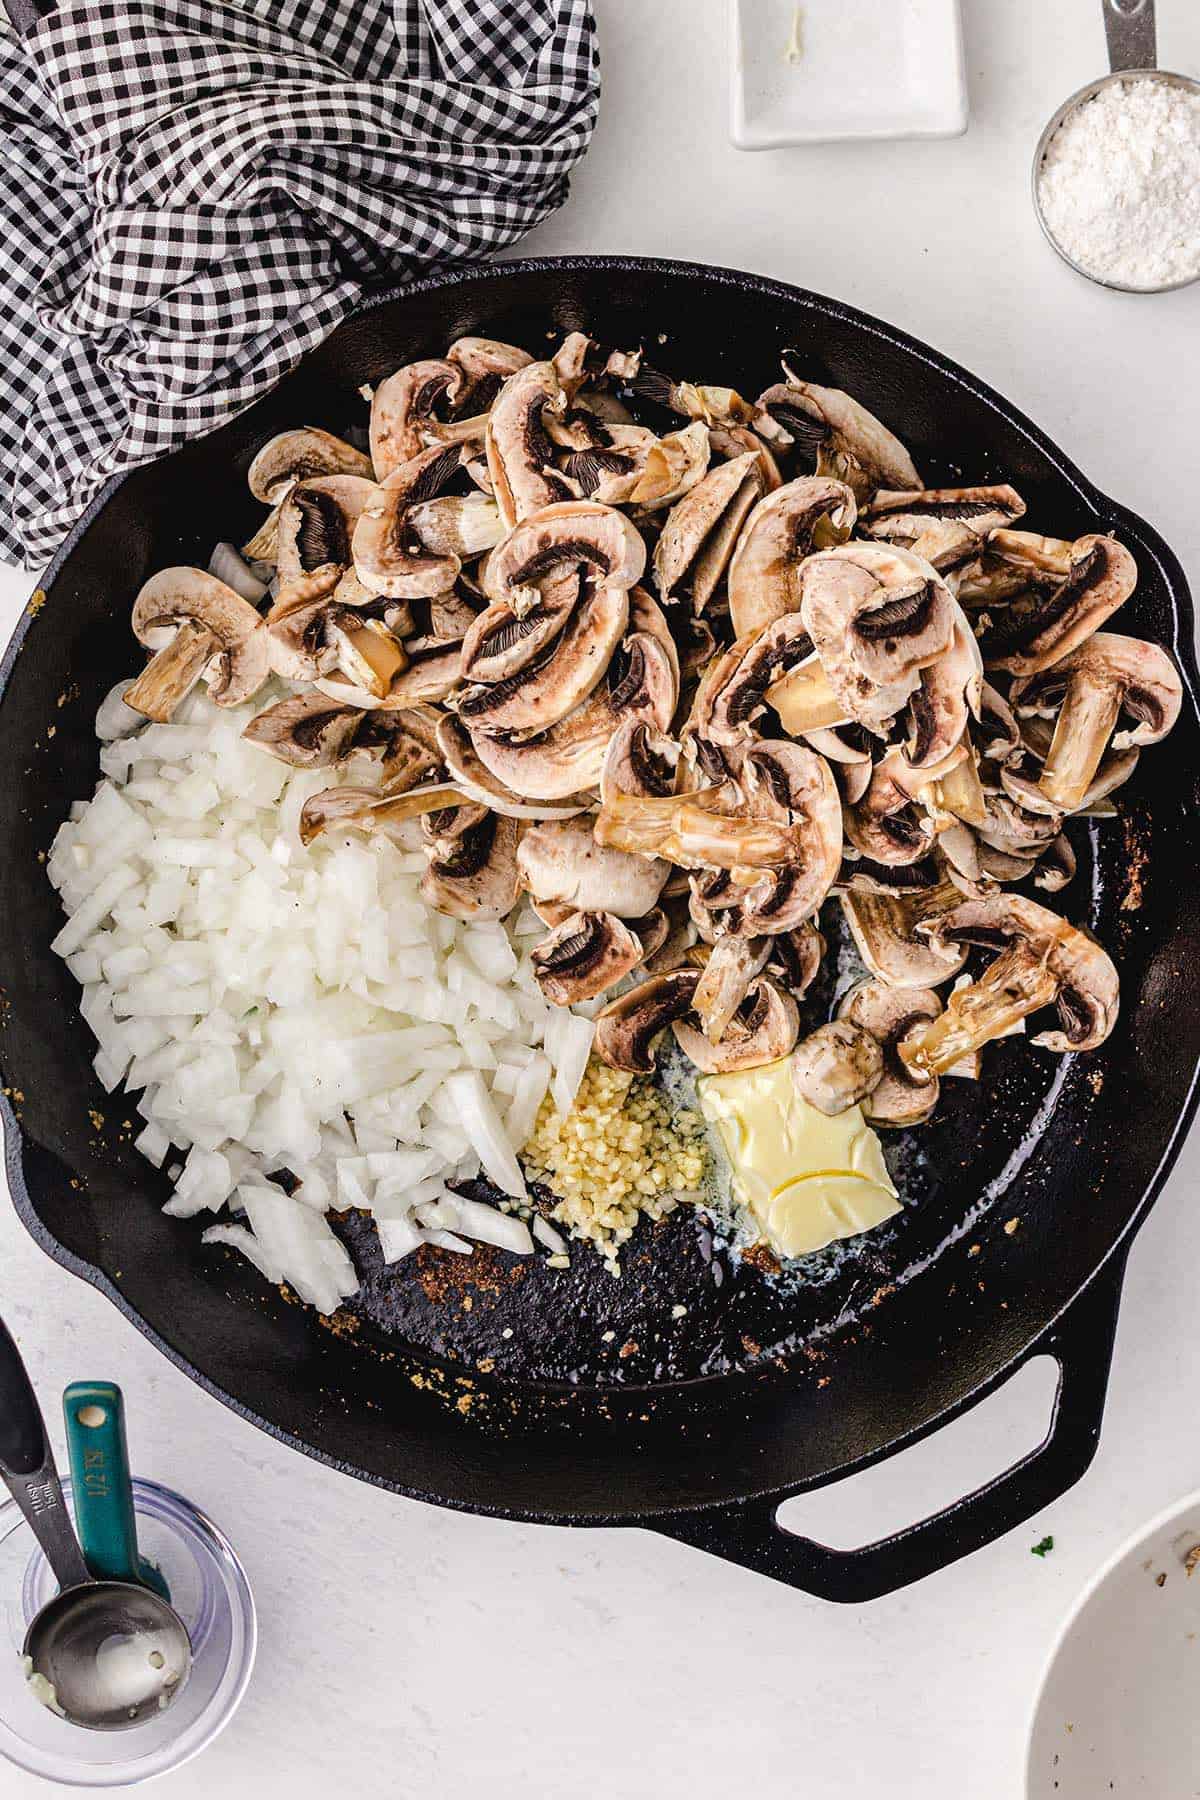 butter, minced garlic, onion, and mushrooms in a frying pan